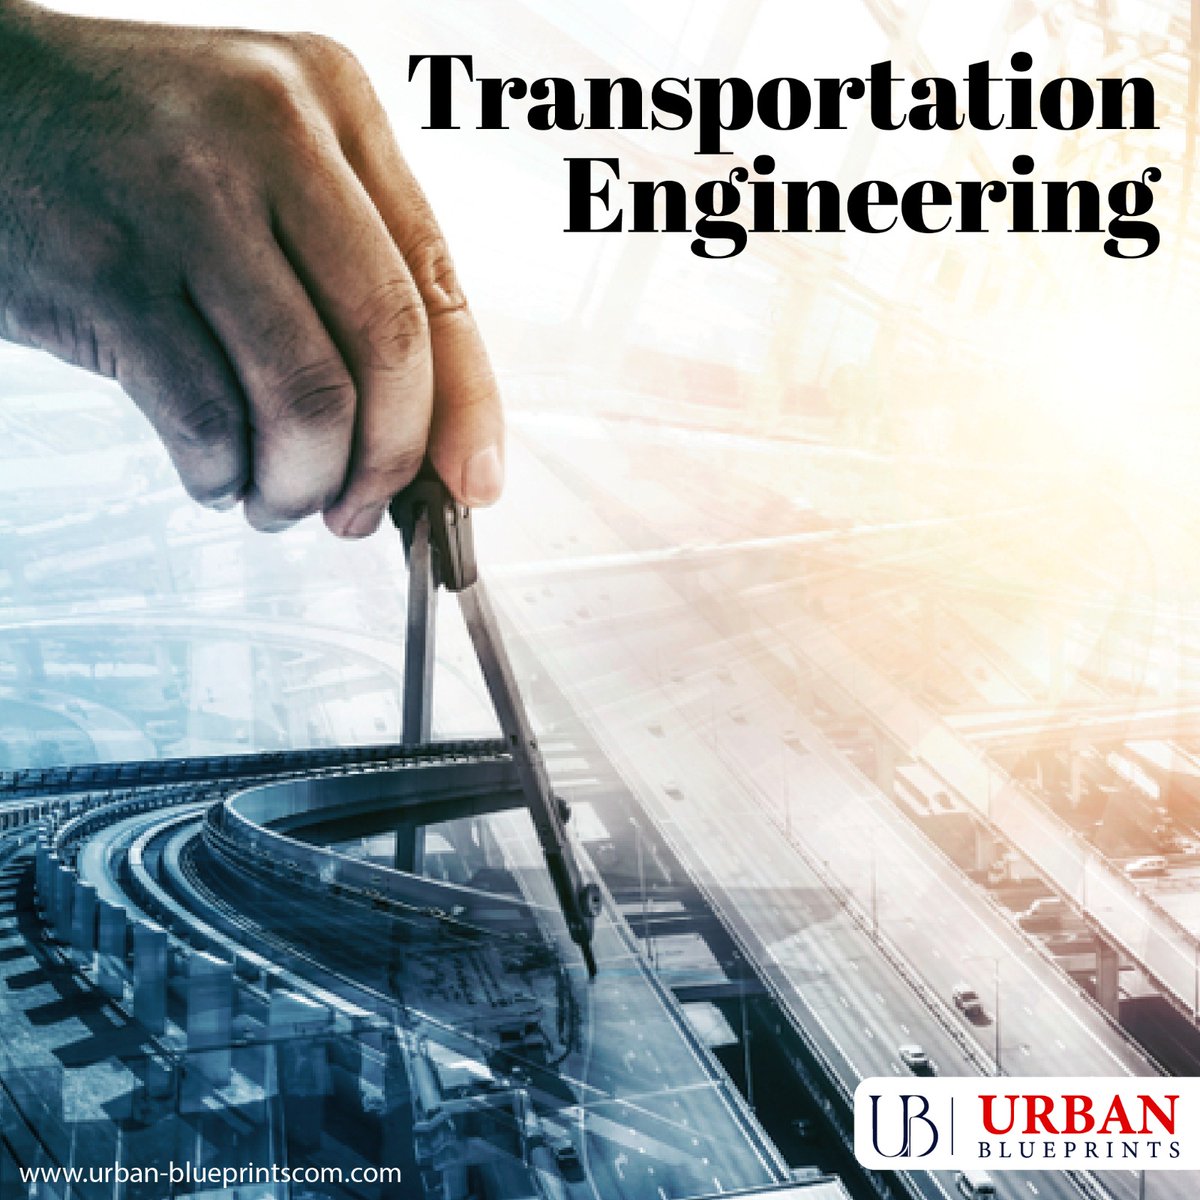 Creating a seamless and connected transportation network through advanced planning and design in Transportation Engineering - Urban Blueprints.
.
.
#urbanblueprints #innovativedesign #transportationengineering #planning 🗺️🔧